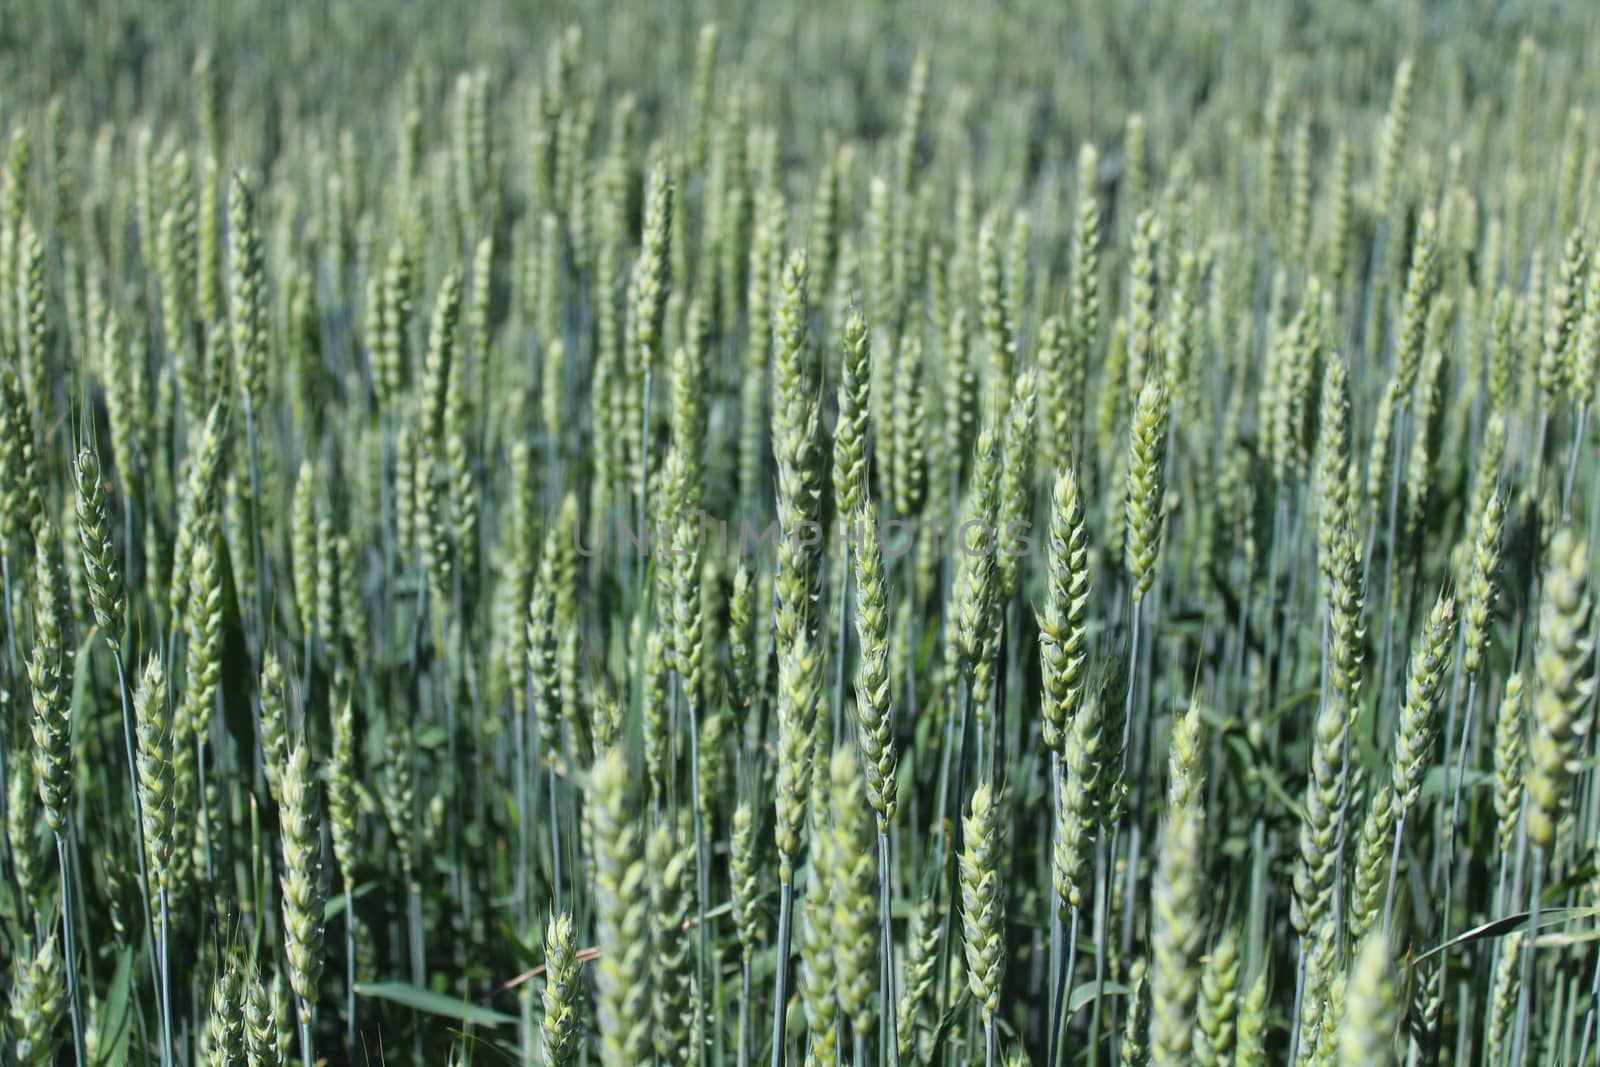 The picture shows wheat field with unripe wheat